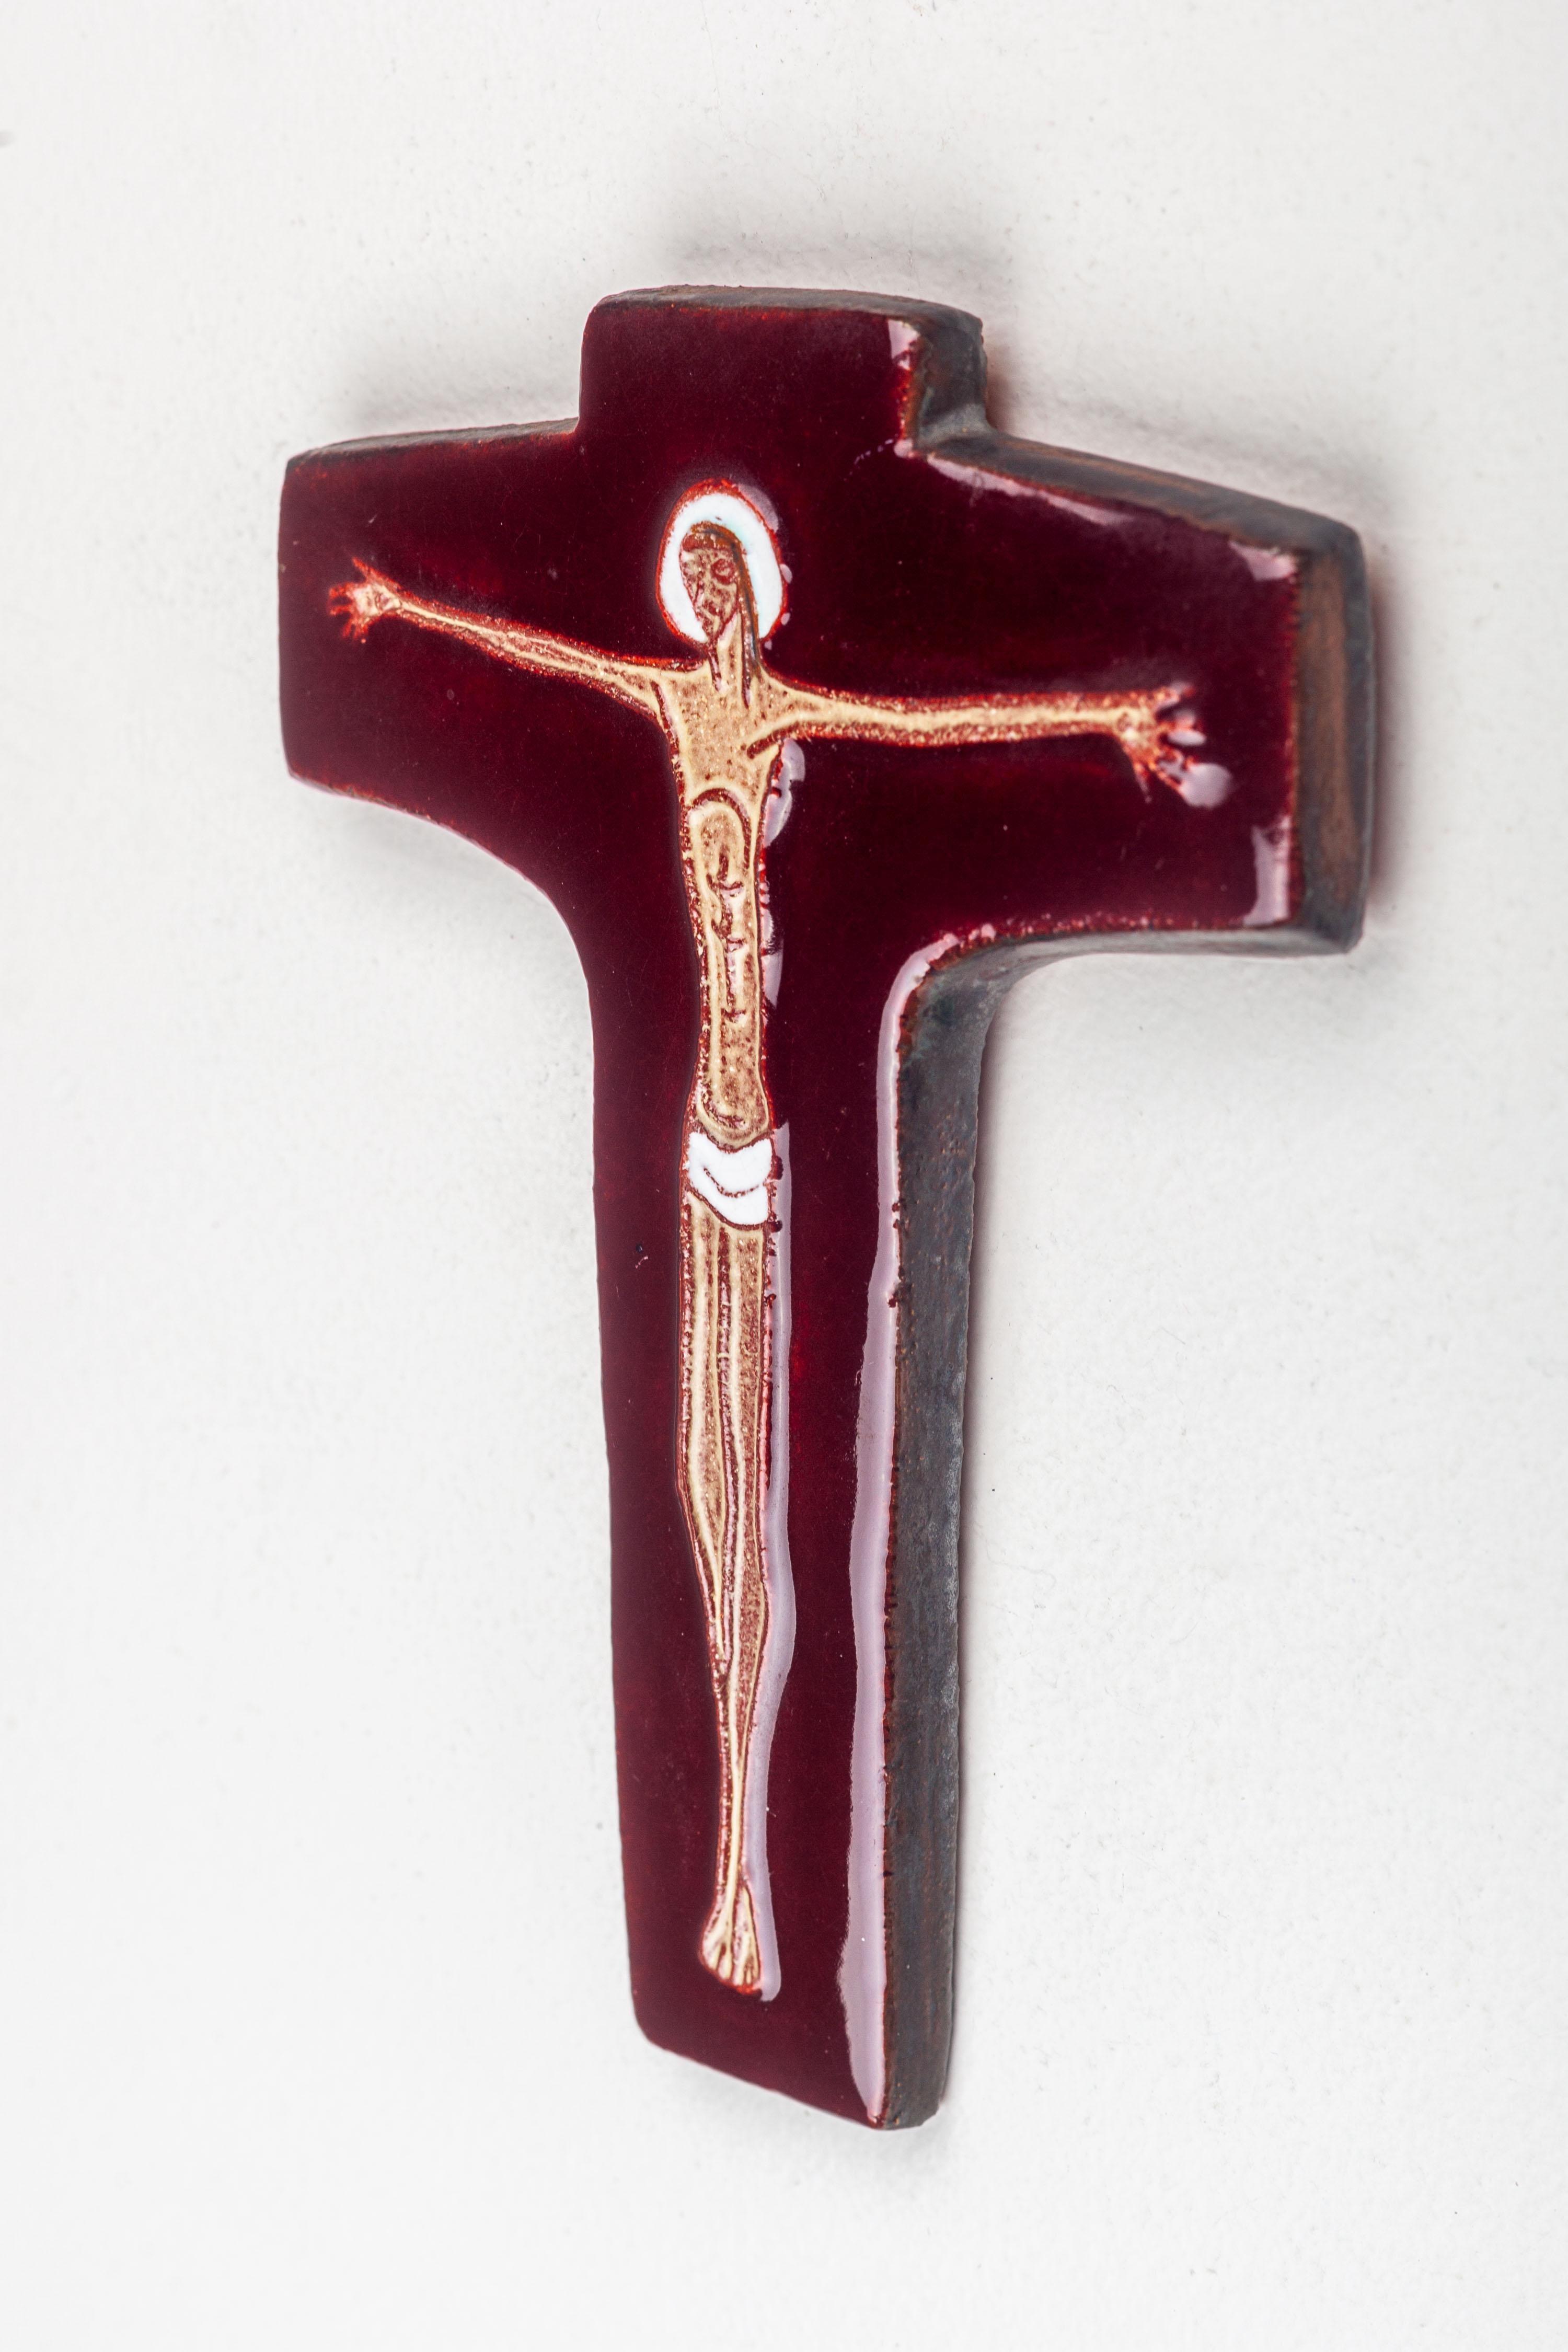 Modernist Crucifix made in Europe by Studio Pottery artist. Deep red brown glossy cross contrasting with the matt elongated floating Christ relief designed in a typically modernist fashion. The posture of the christ figure is generous and